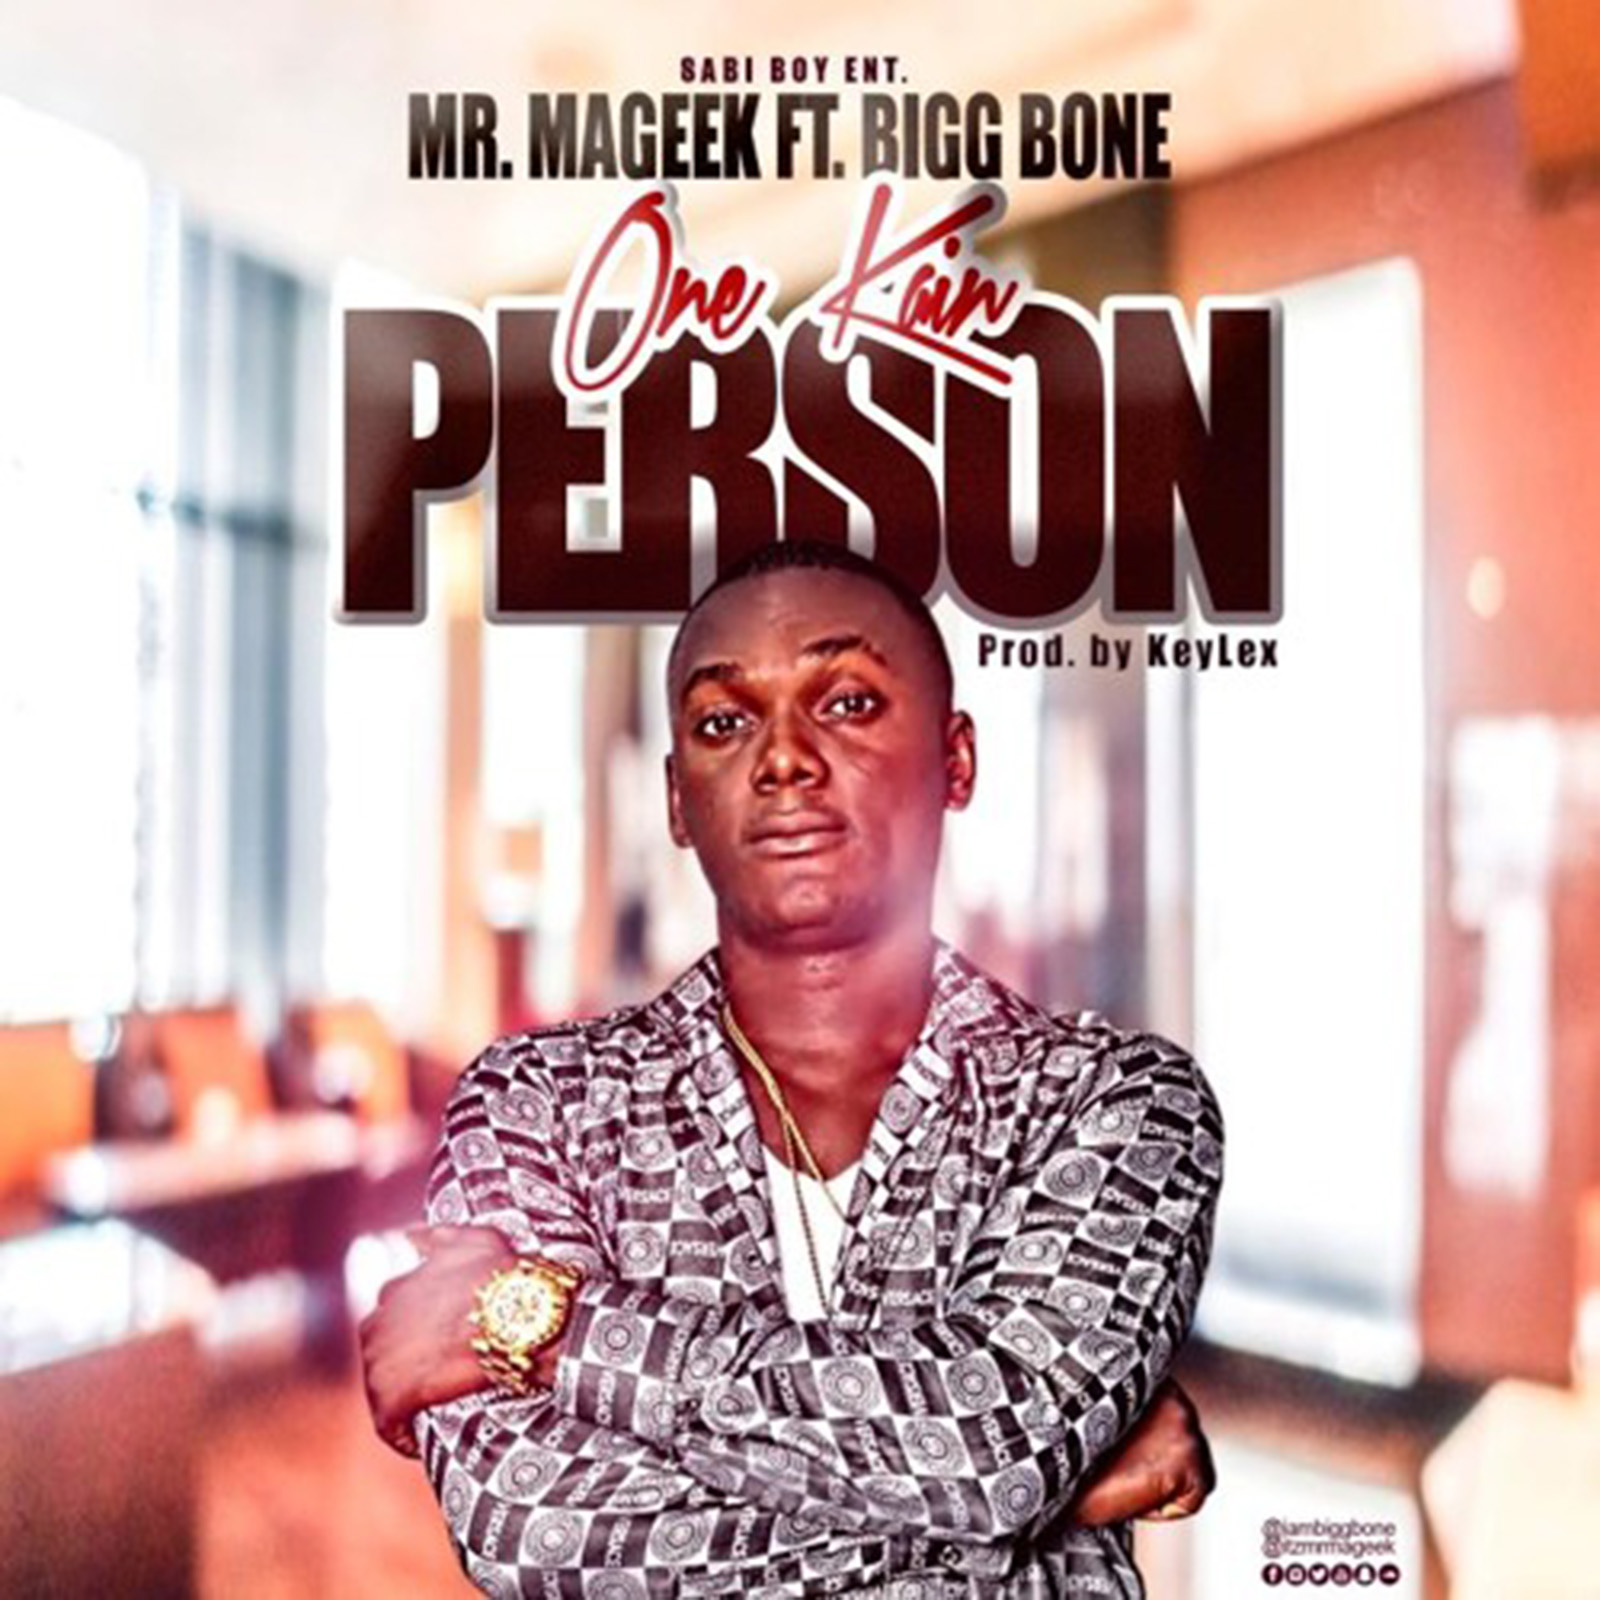 One Kain Person by Mr. Mageek feat. Bigg Bone